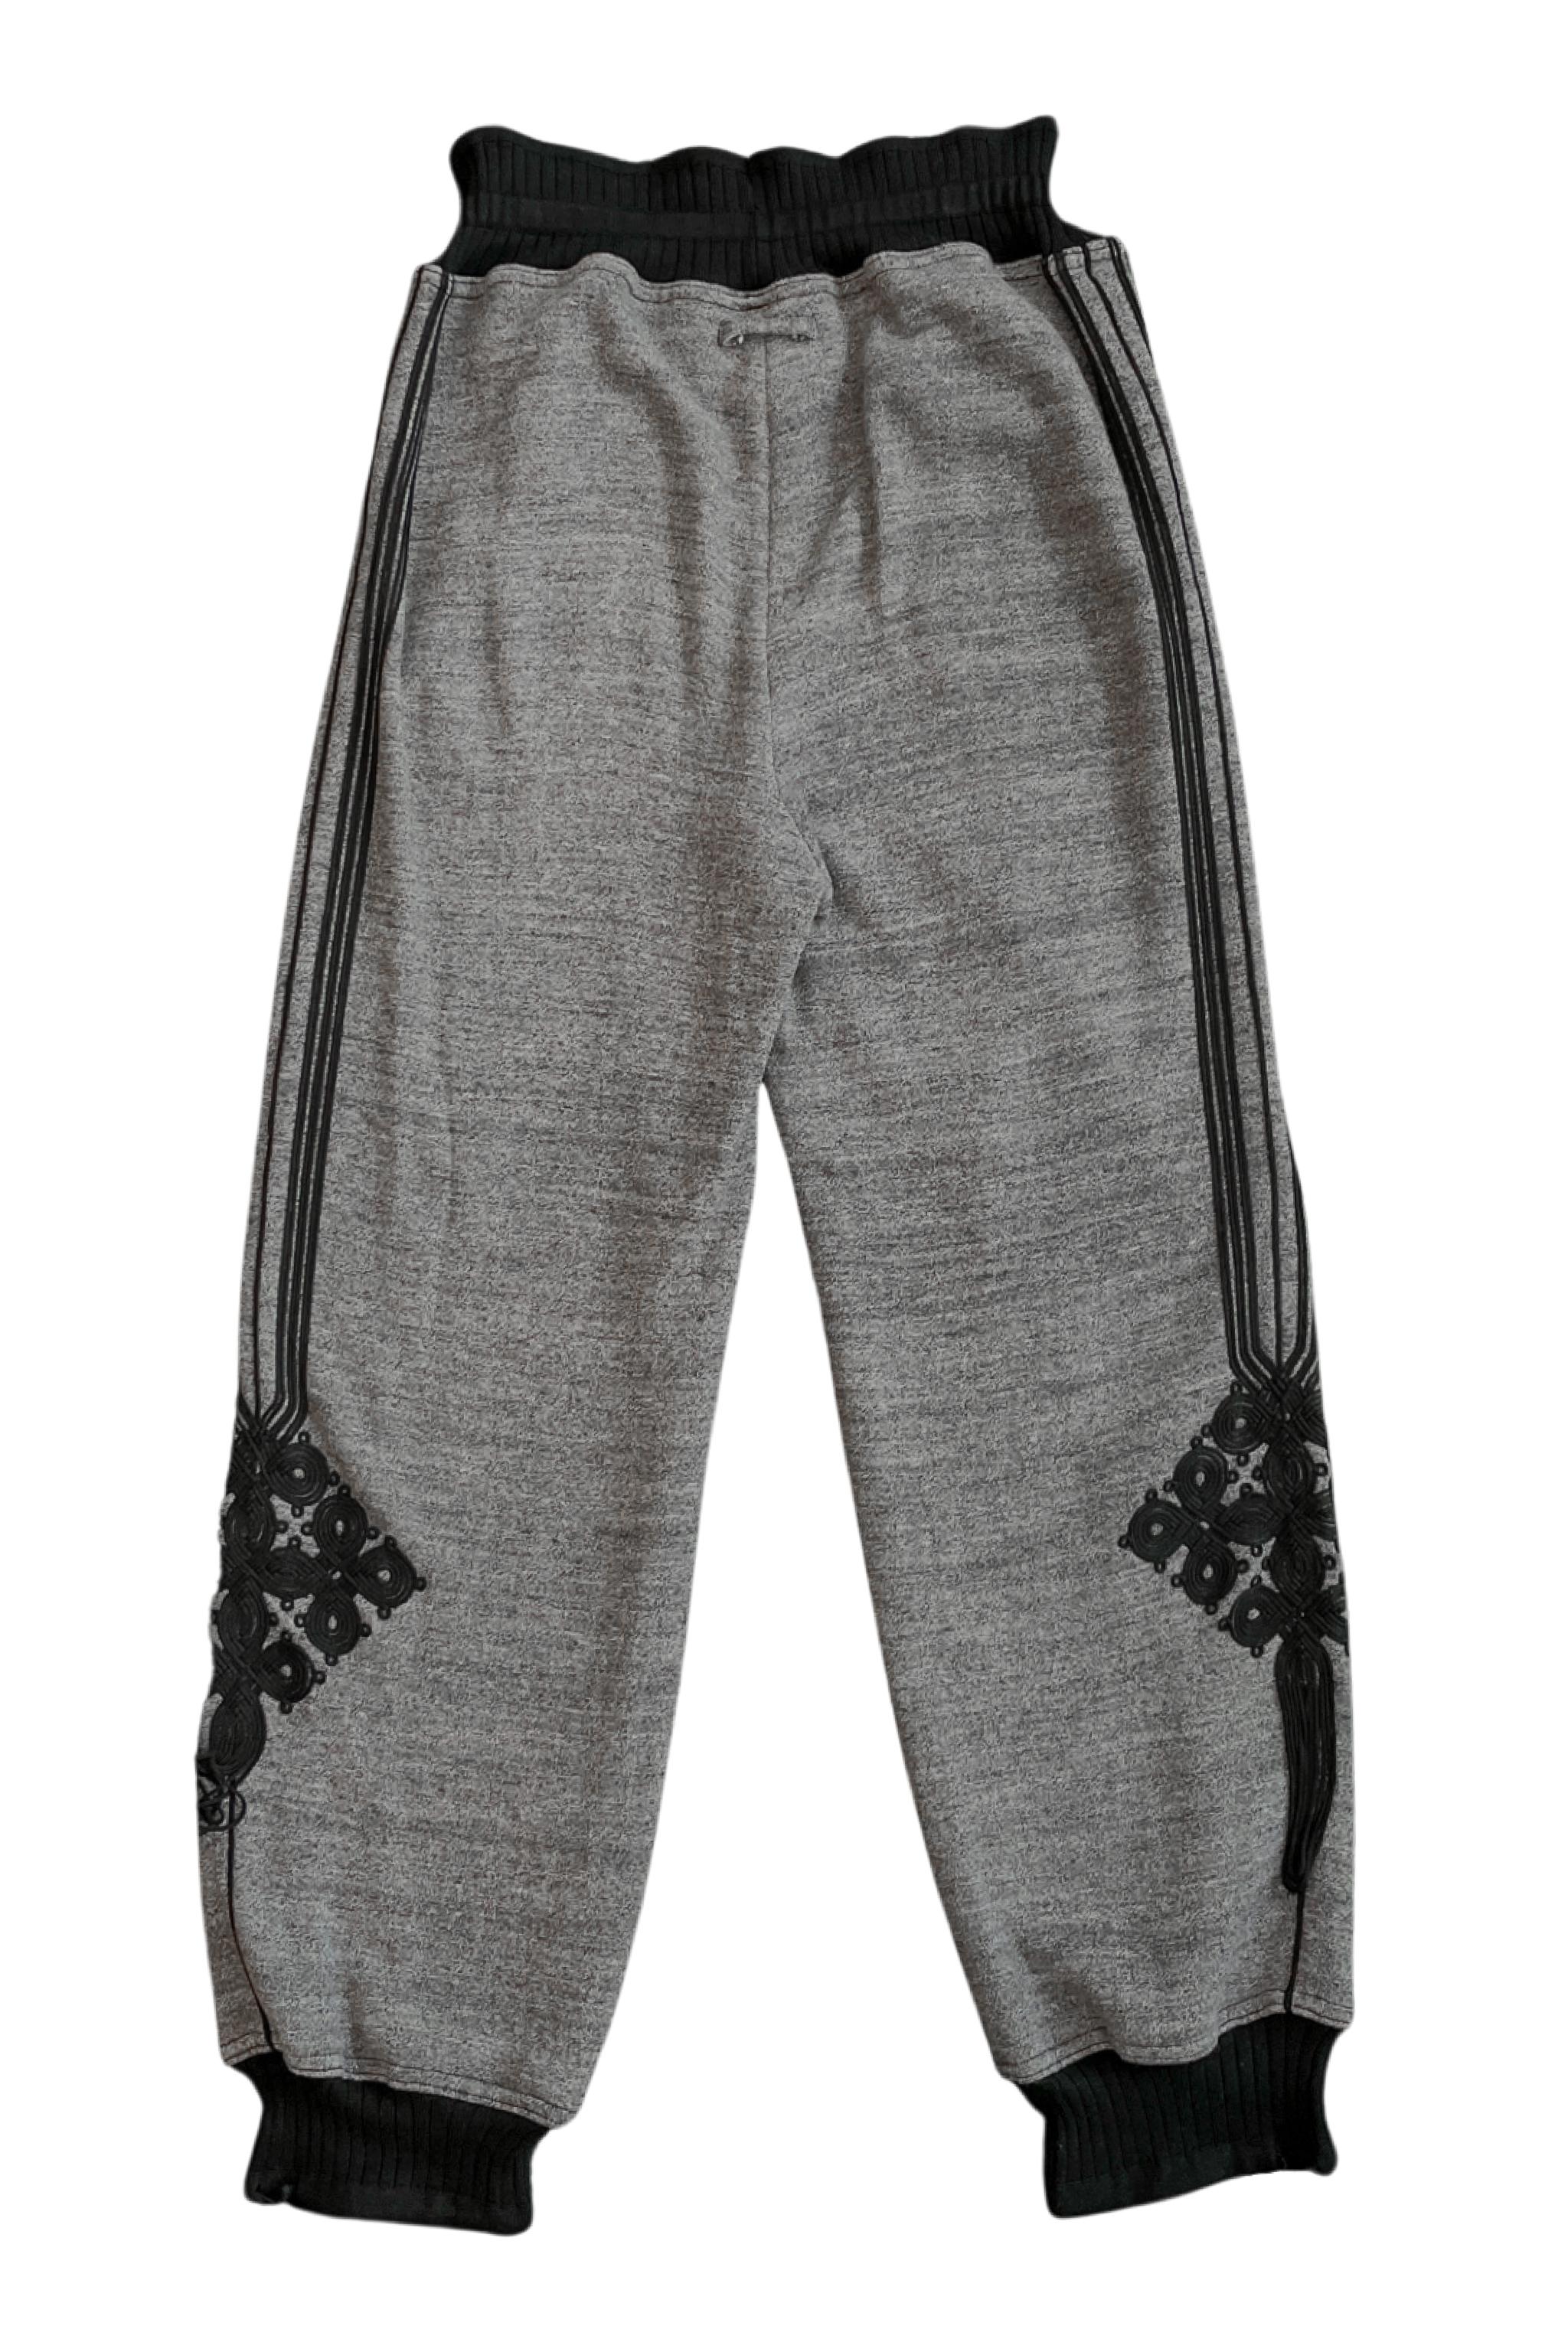 Women's Gaultier Grey Sweatpants With Embroidery 2010 For Sale